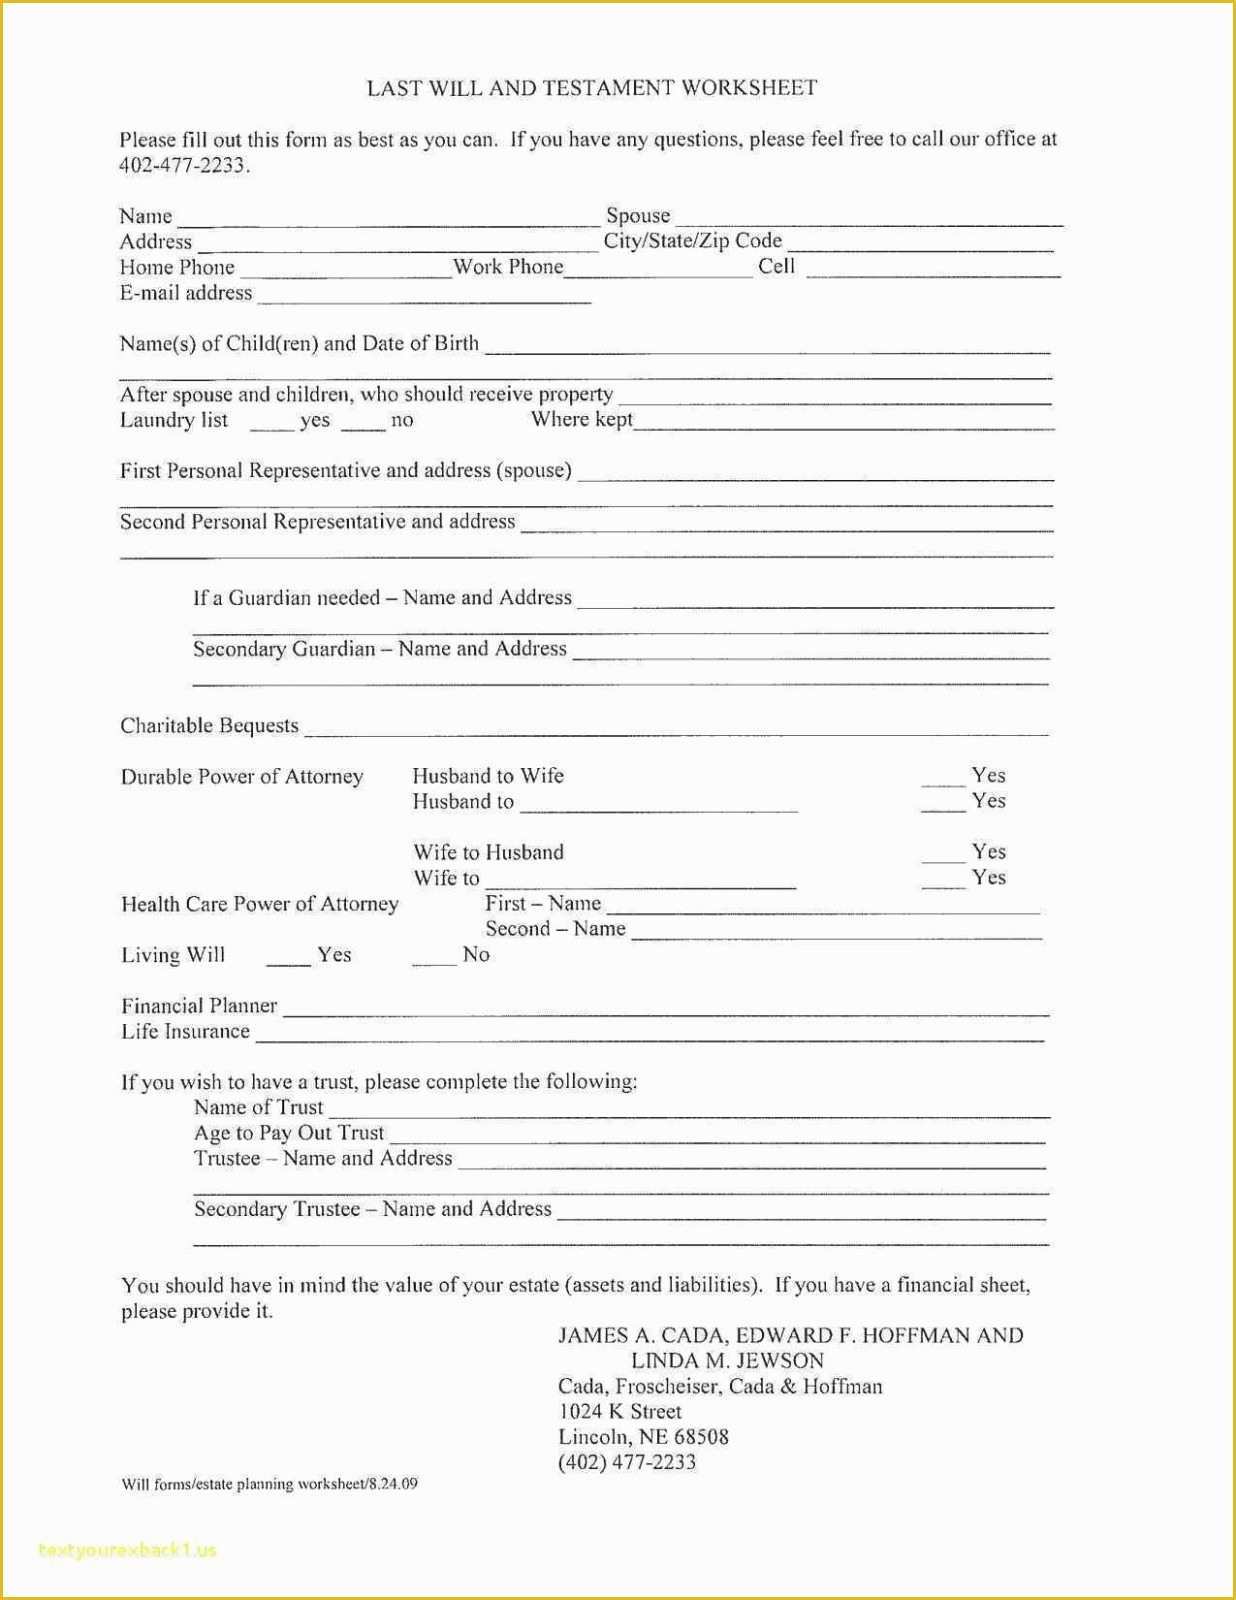 Last Will and Testament Free Template Washington State Of Elegant Basic